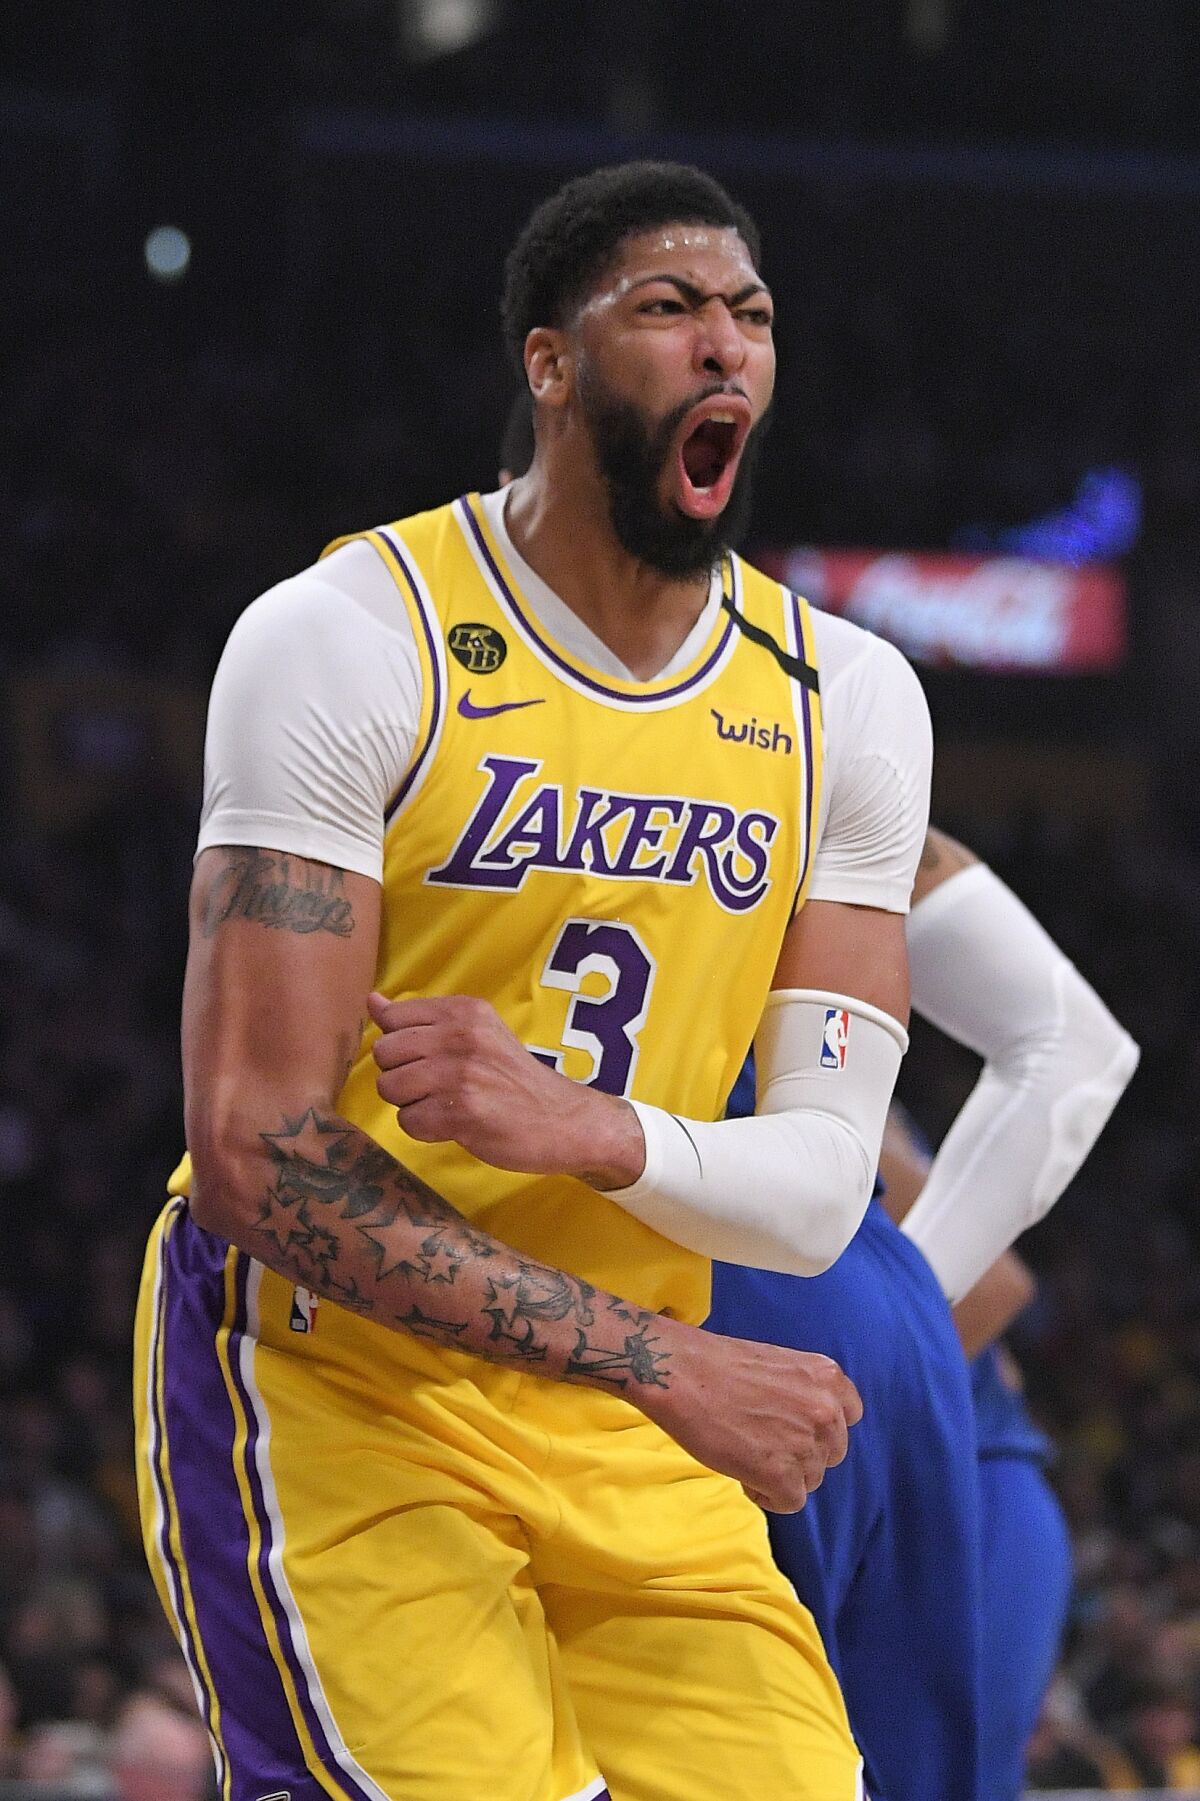 FILE - In this March 3, 2020, file photo, Los Angeles Lakers forward Anthony Davis celebrates after scoring during the first half of an NBA basketball game against the Philadelphia 76ers, in Los Angeles. Jusuf Nurkic is back and healthy. So are Zach Collins, Meyers Leonard, Giannis Antetokounmpo, Anthony Davis and plenty of others. If the four-month NBA shutdown had a silver lining, it’s that a lot of ailing players got well.(AP Photo/Mark J. Terrill, File)